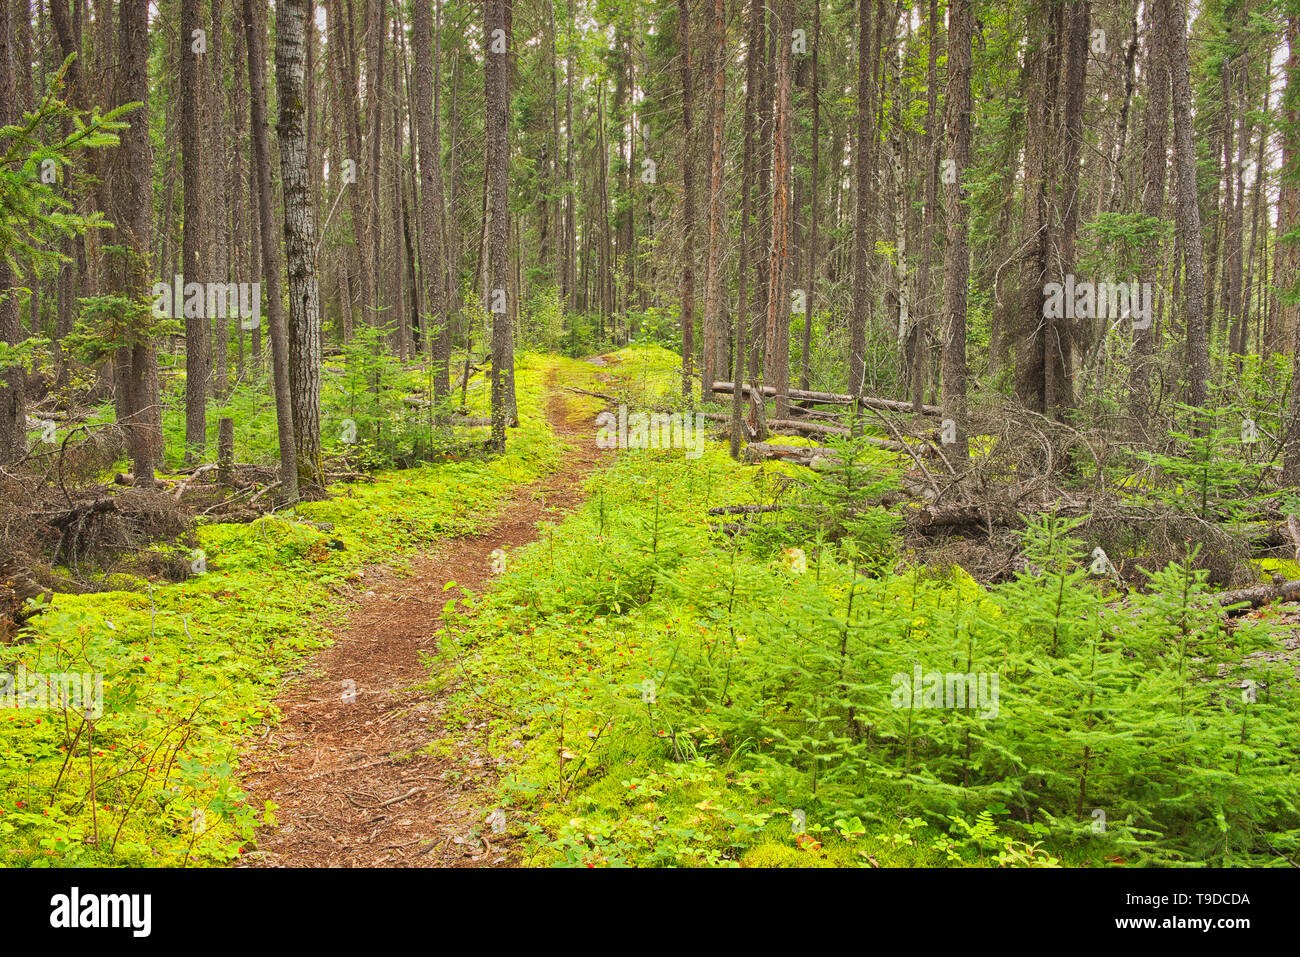 Black spruce trees and moss covered forest floor in the Boreal forest  Pisew Falls Provincial Park Manitoba Canada Stock Photo